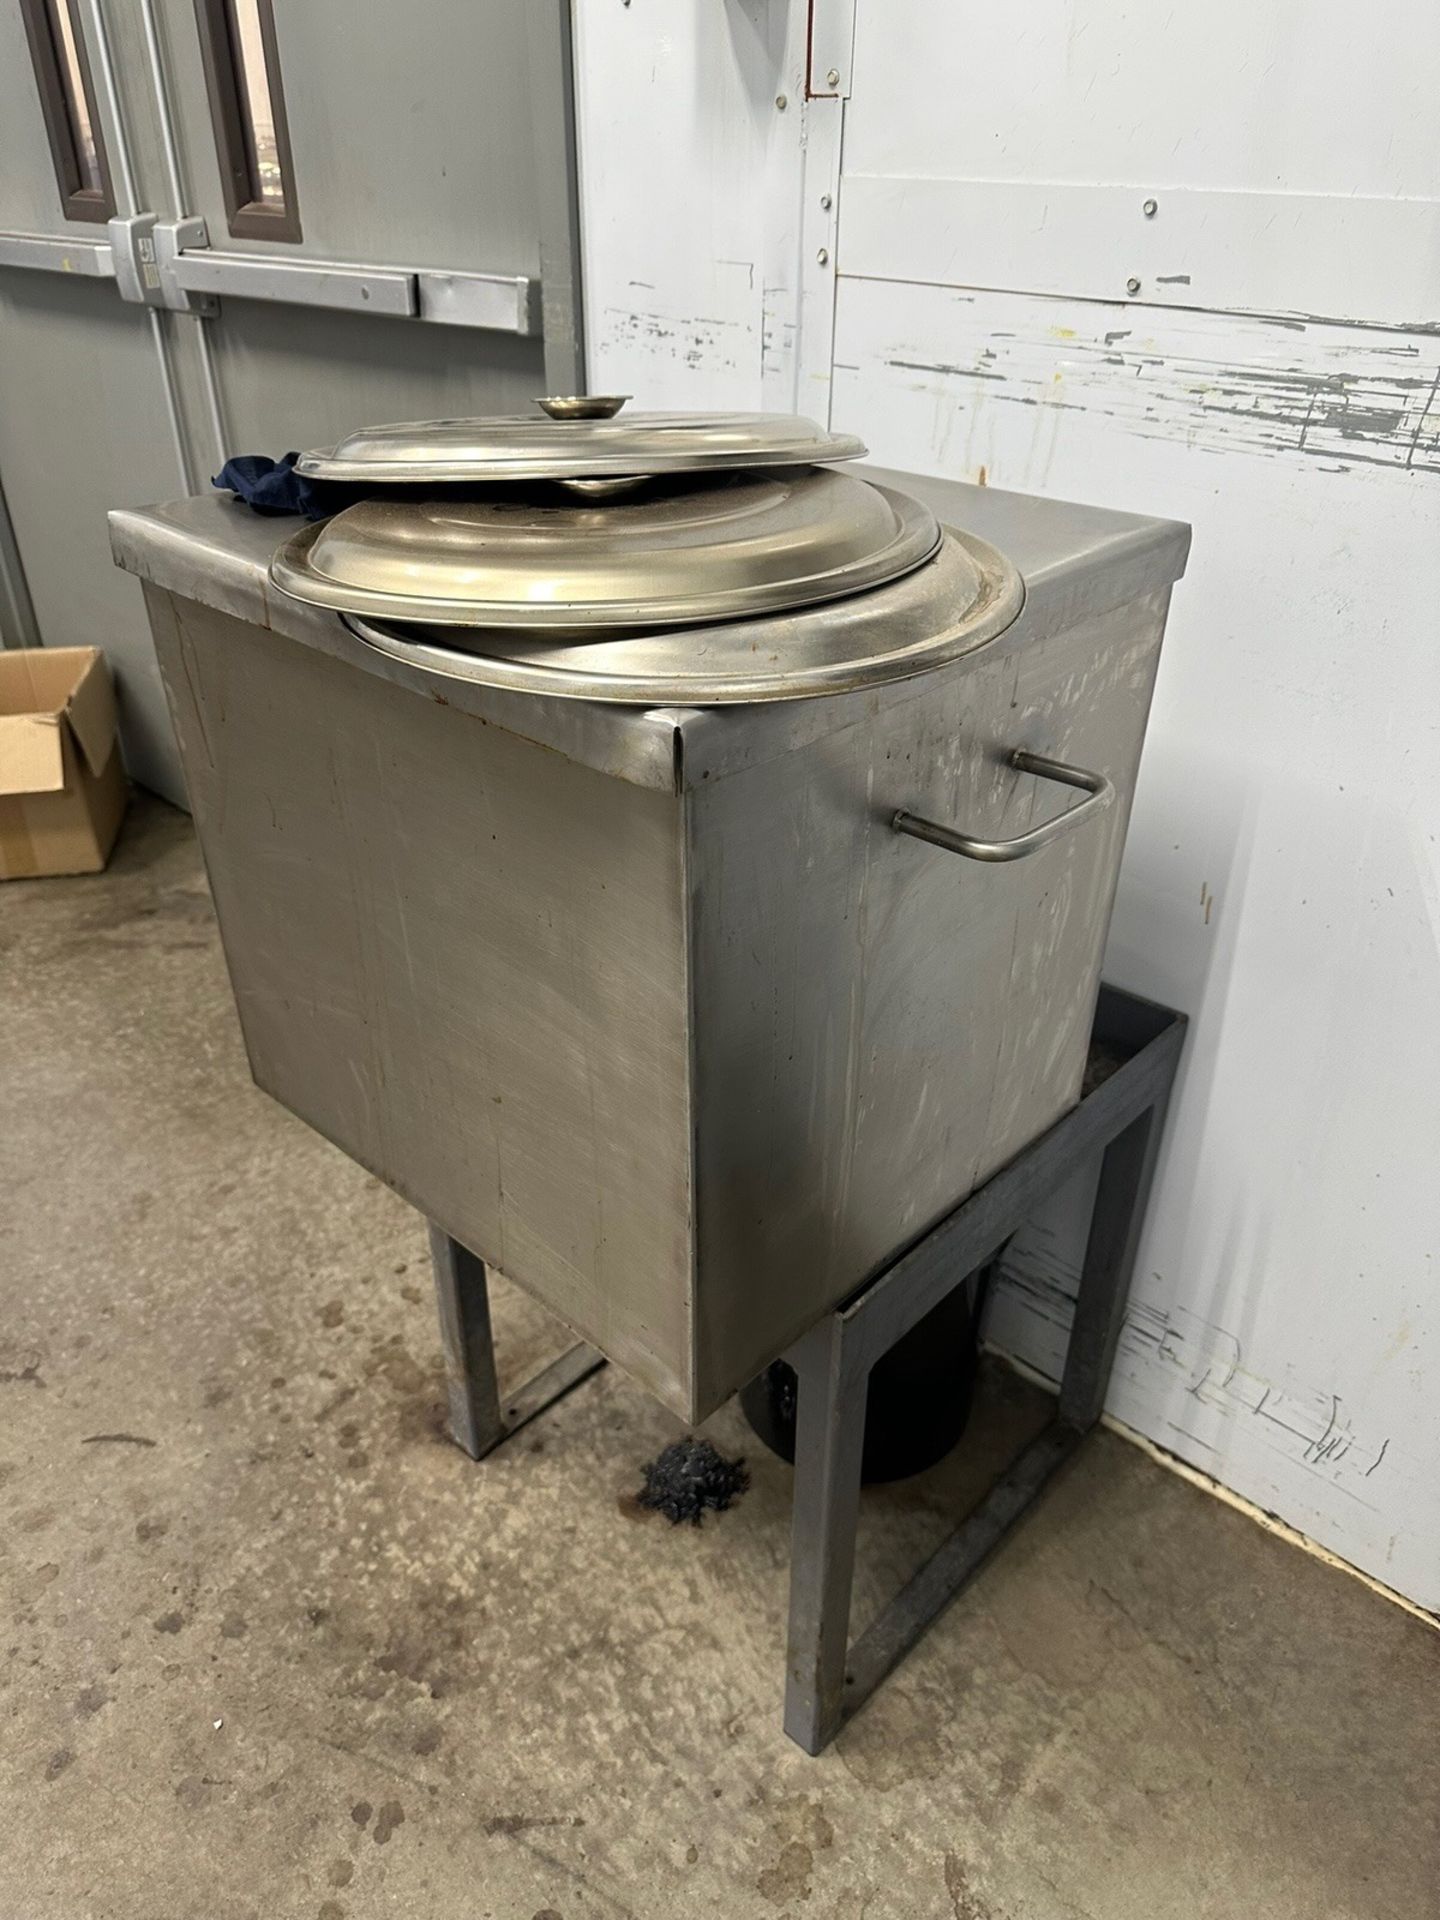 Stainless Steel Holding Tank | Rig Fee $100 - Image 2 of 3